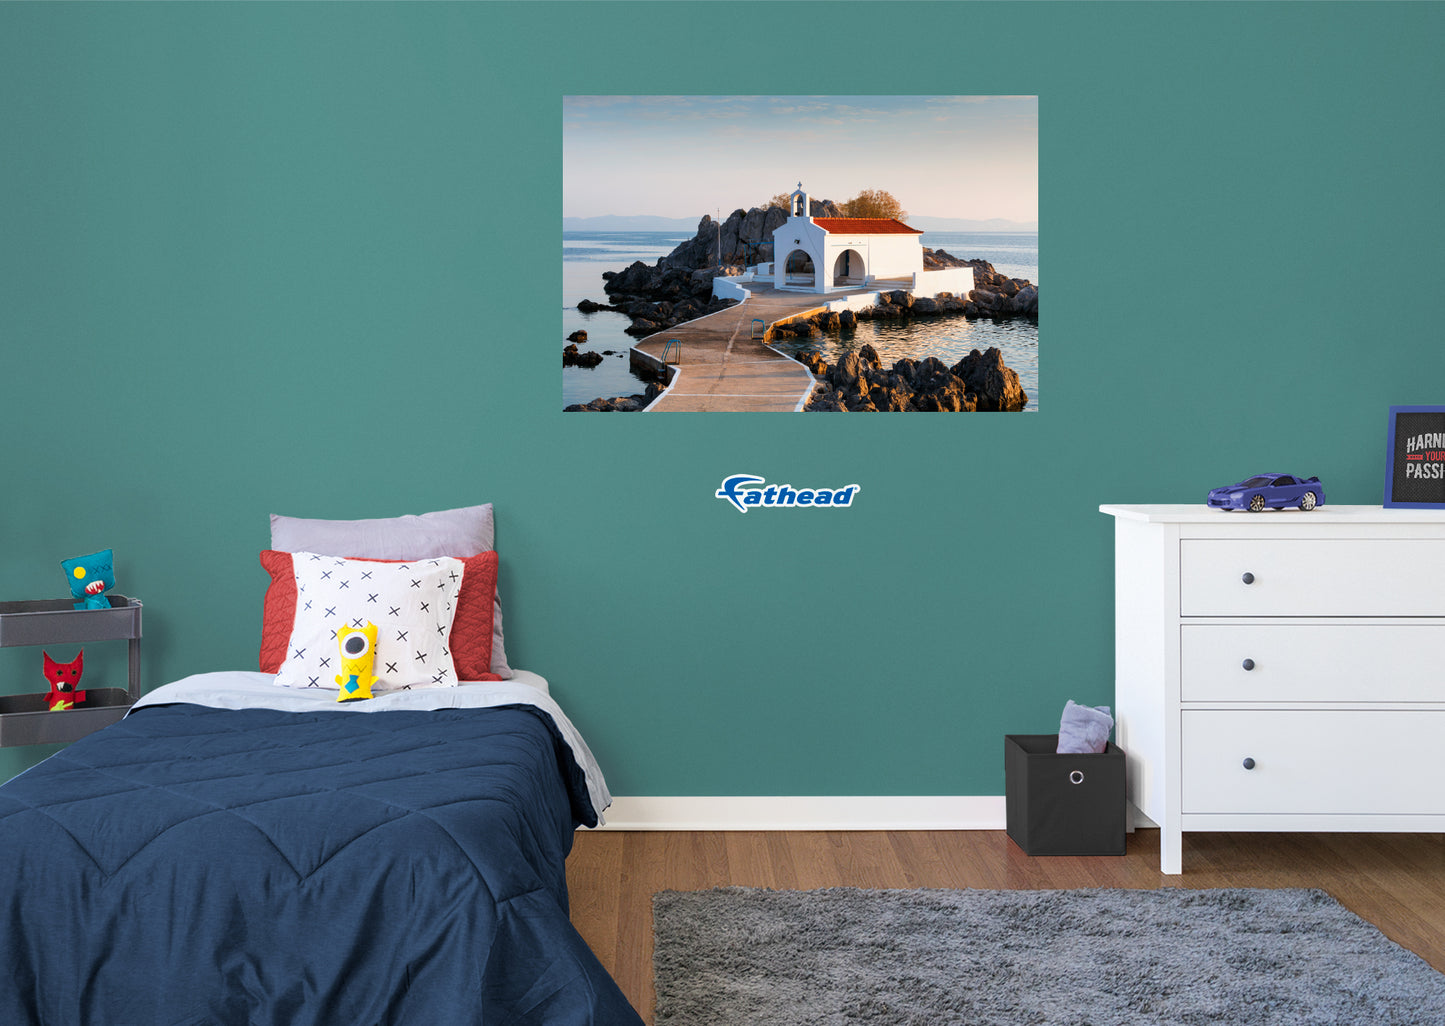 Generic Scenery:  Quiet Poster        -   Removable     Adhesive Decal